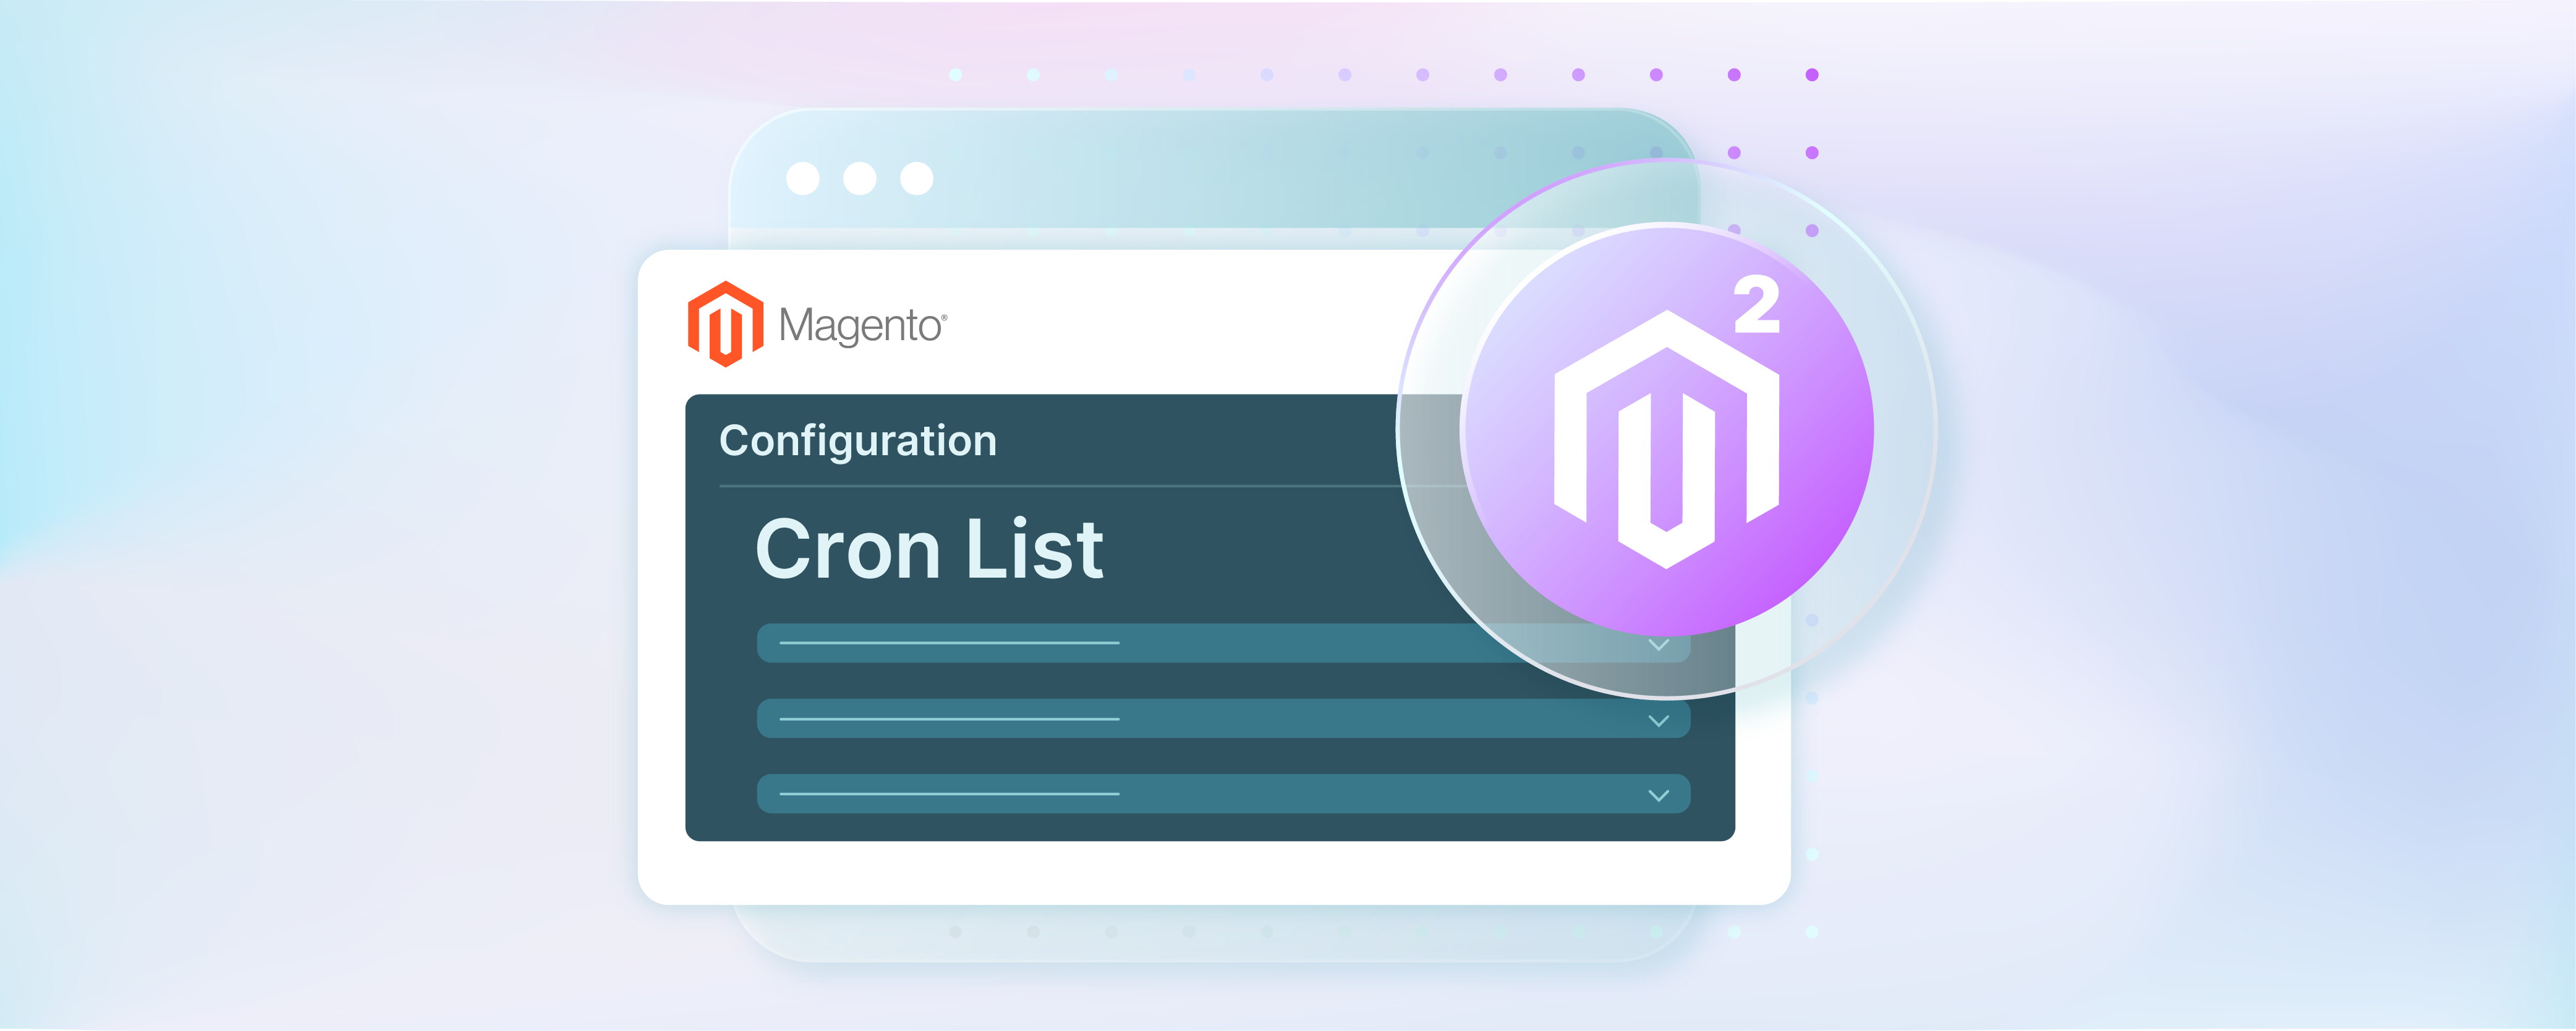 How to Install, Run, and Secure Magento 2 Cron List